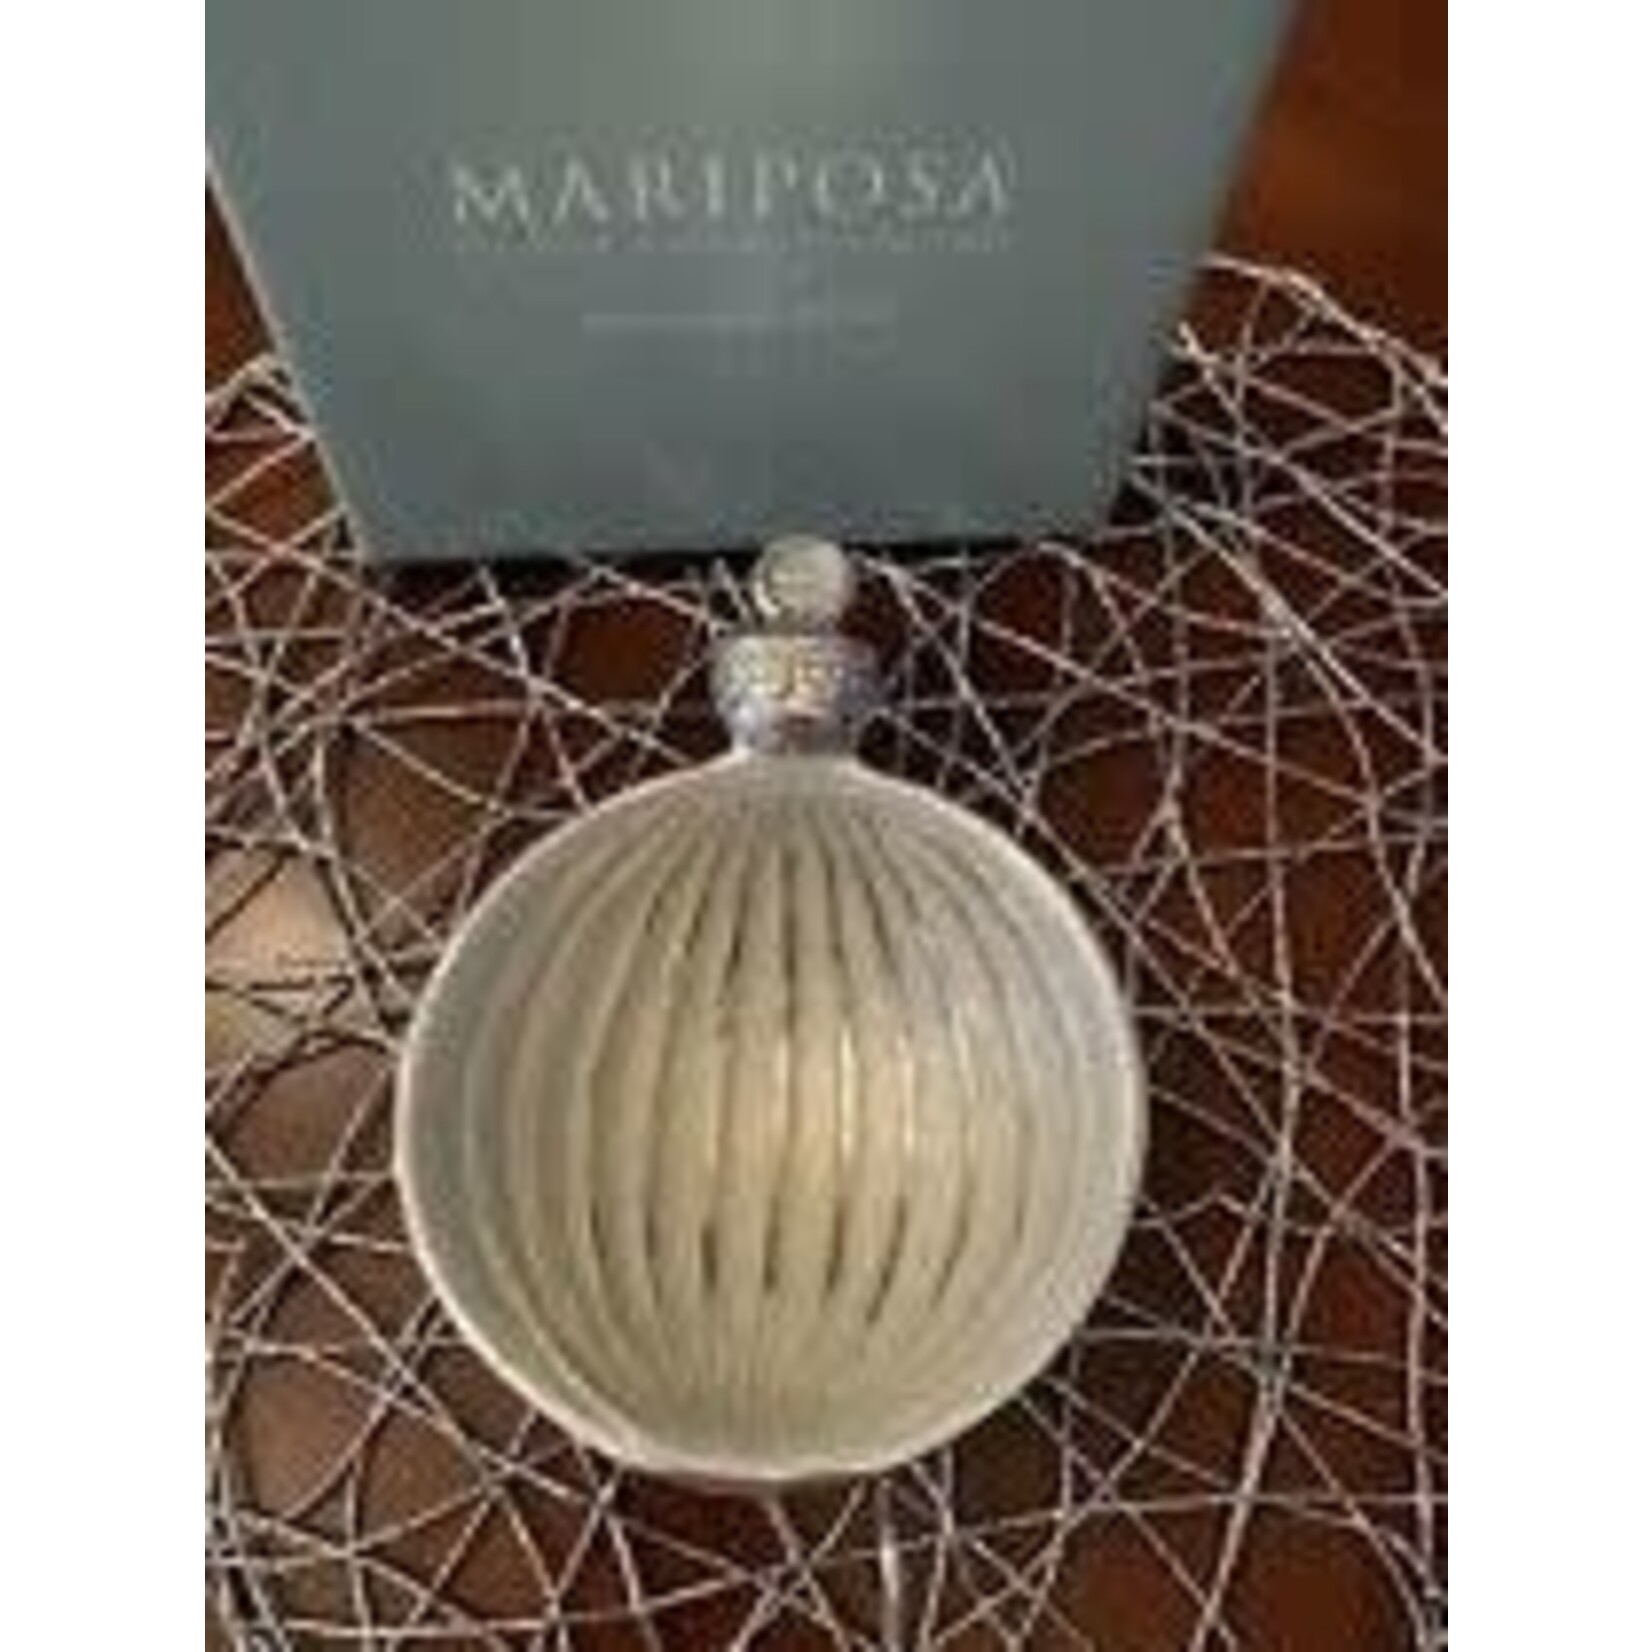 Mariposa Traditions Ornament Candy Dish White